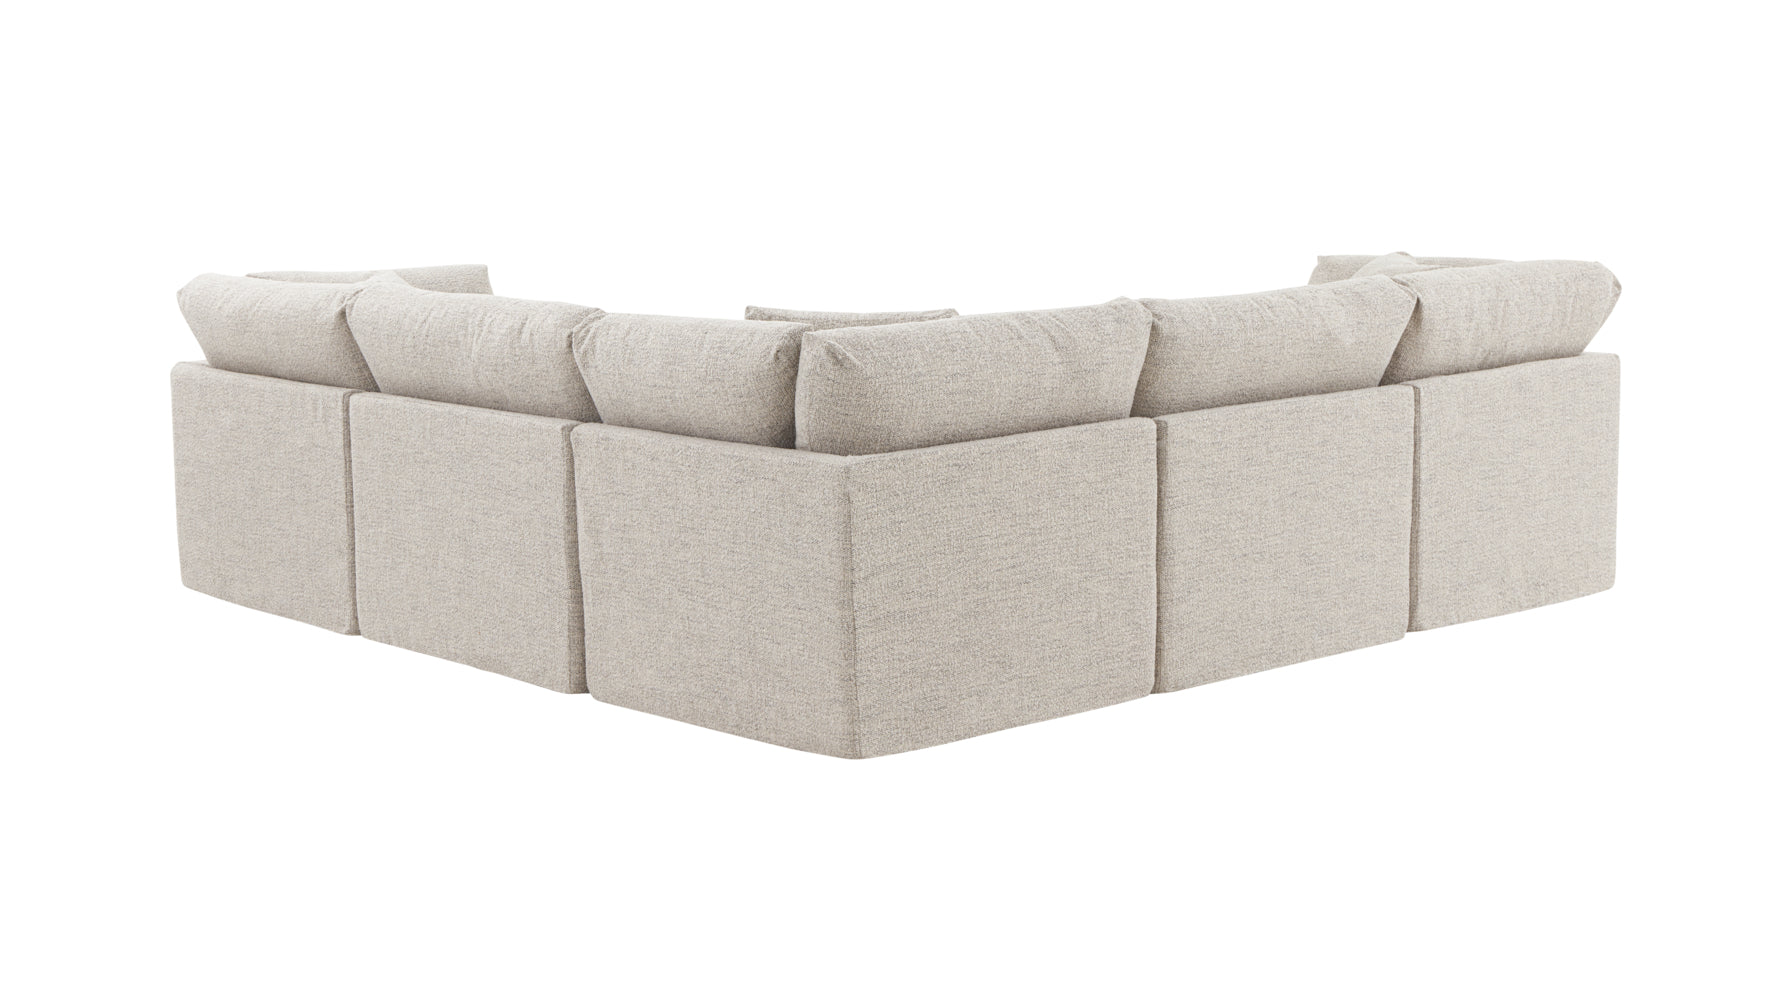 Get Together™ 5-Piece Modular Sectional Closed, Standard, Oatmeal - Image 6